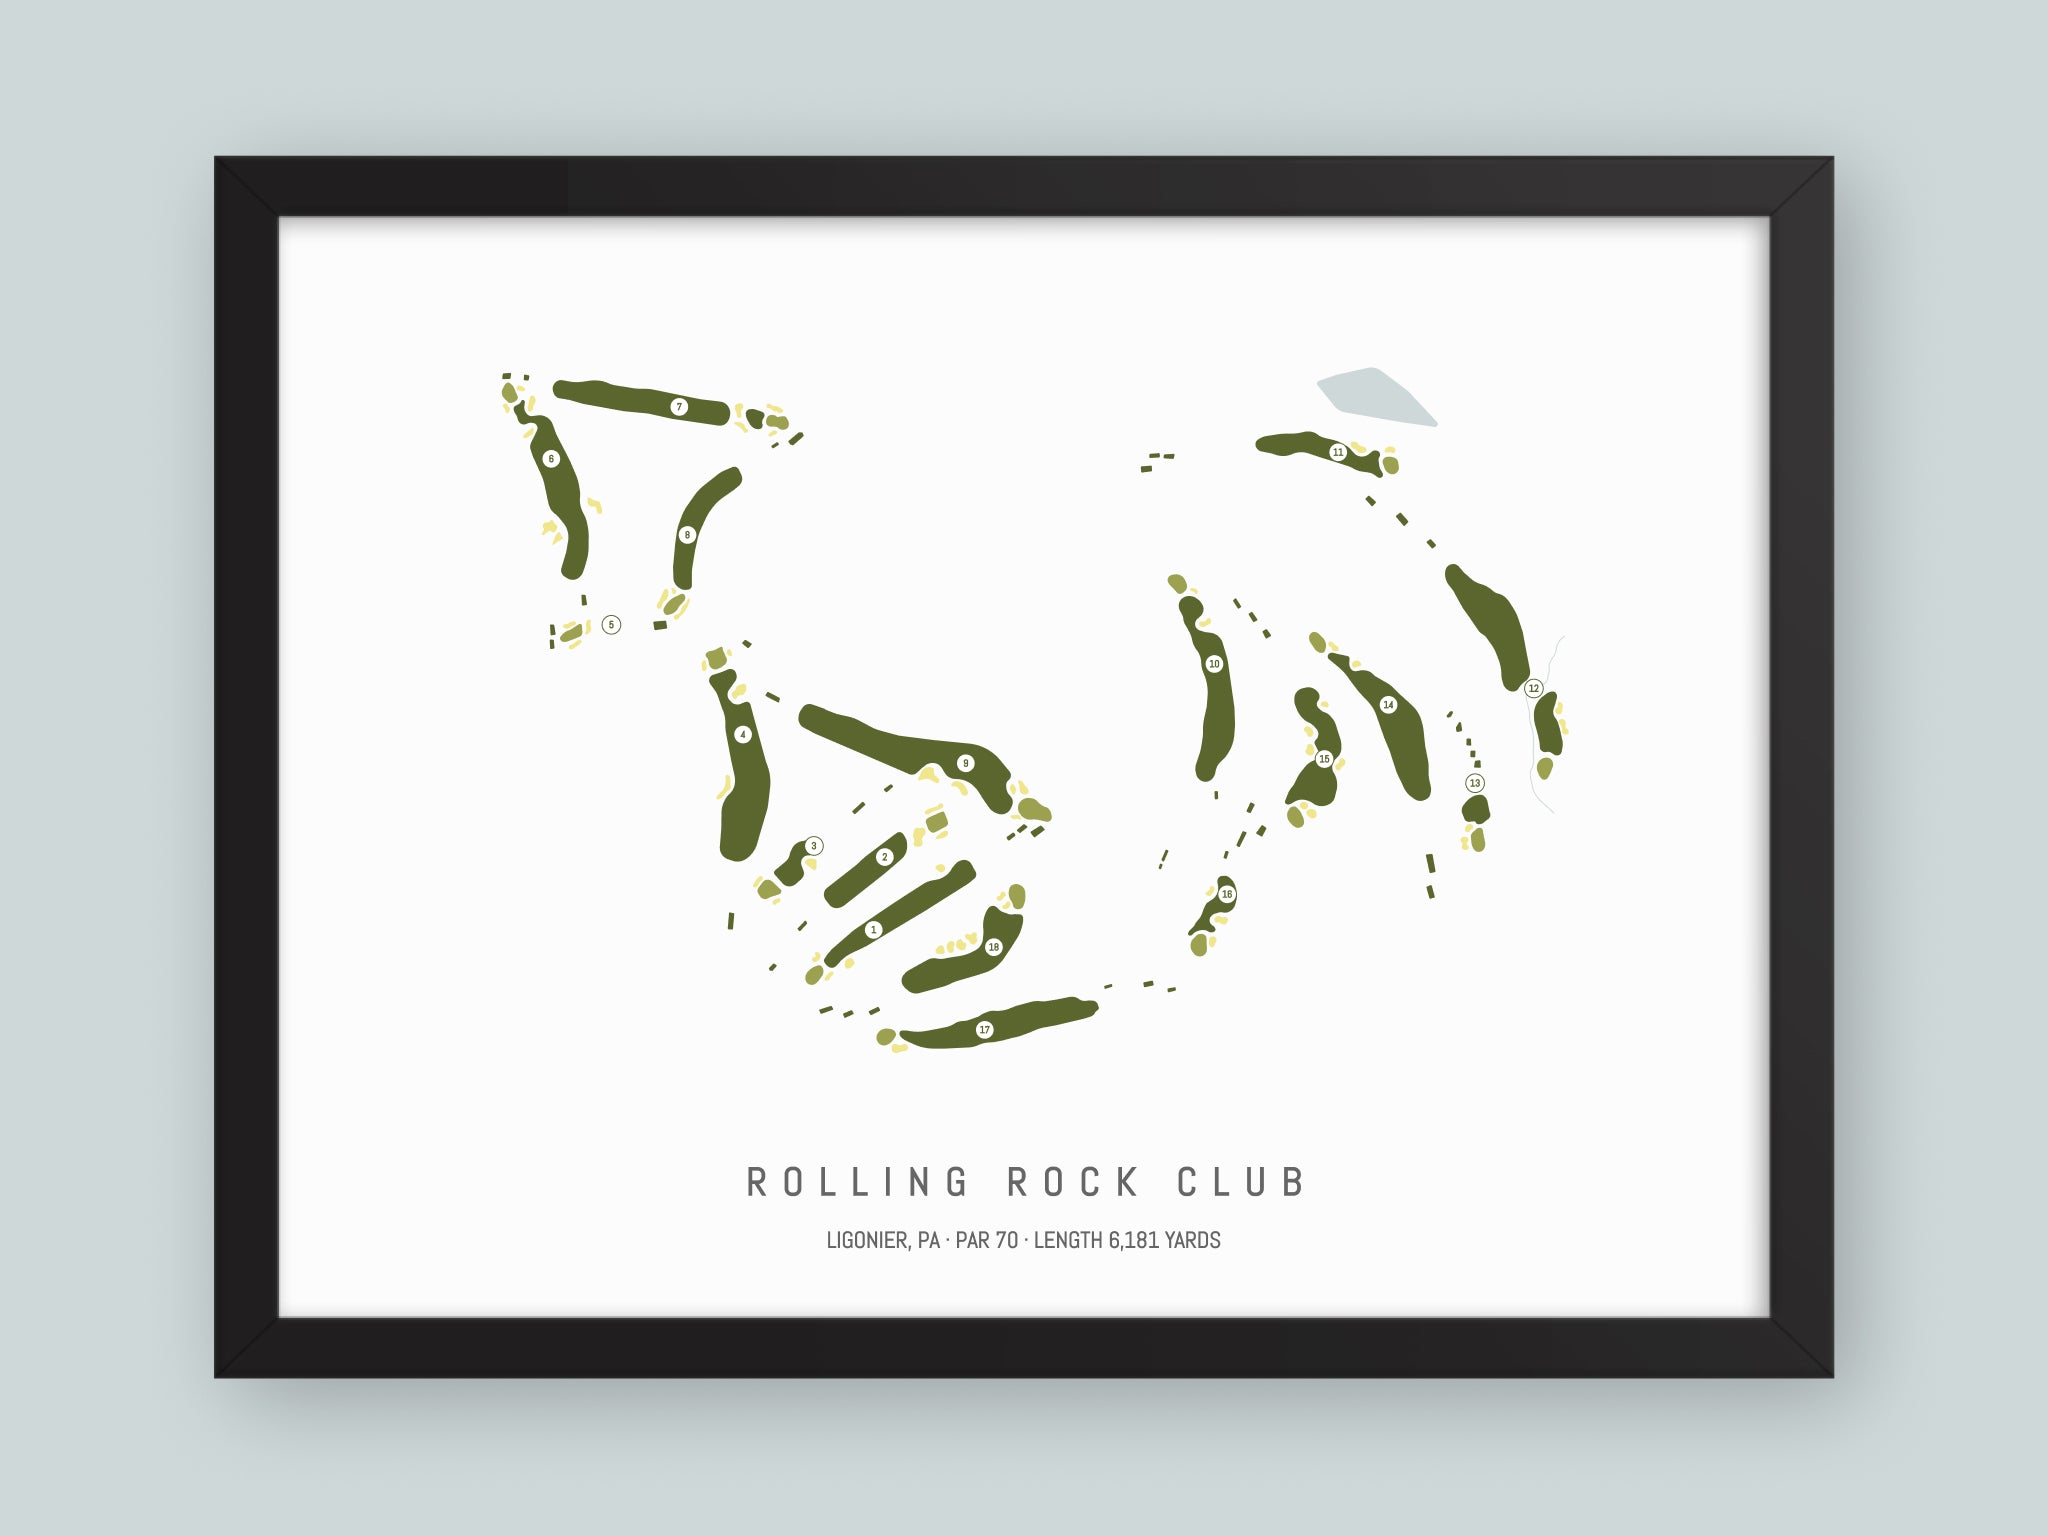 Rolling-Rock-Club-PA--Black-Frame-24x18-With-Hole-Numbers